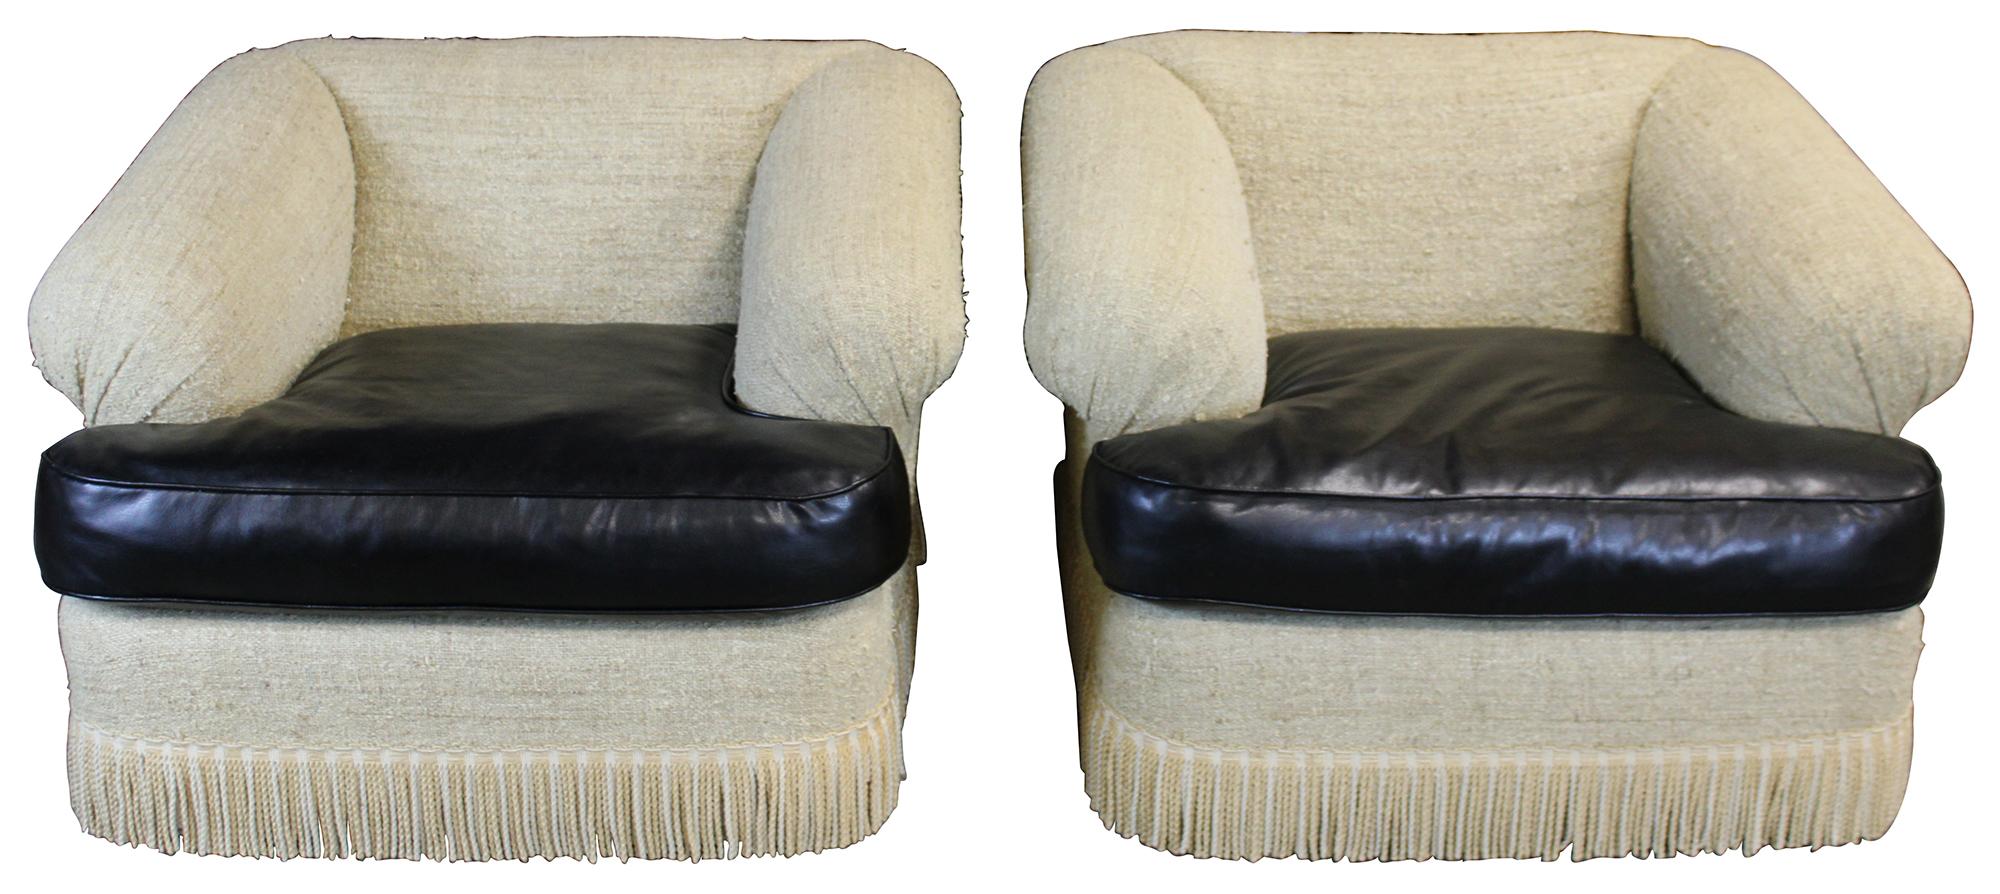 Vintage Kreiss Collection nubby linen and Naugahyde oversized lounge chairs and ottoman. These come from the original owner who purchased them direct from Kreiss in the 1990s. Plush and comfortable, ready for another 30 years of use! Attributed to